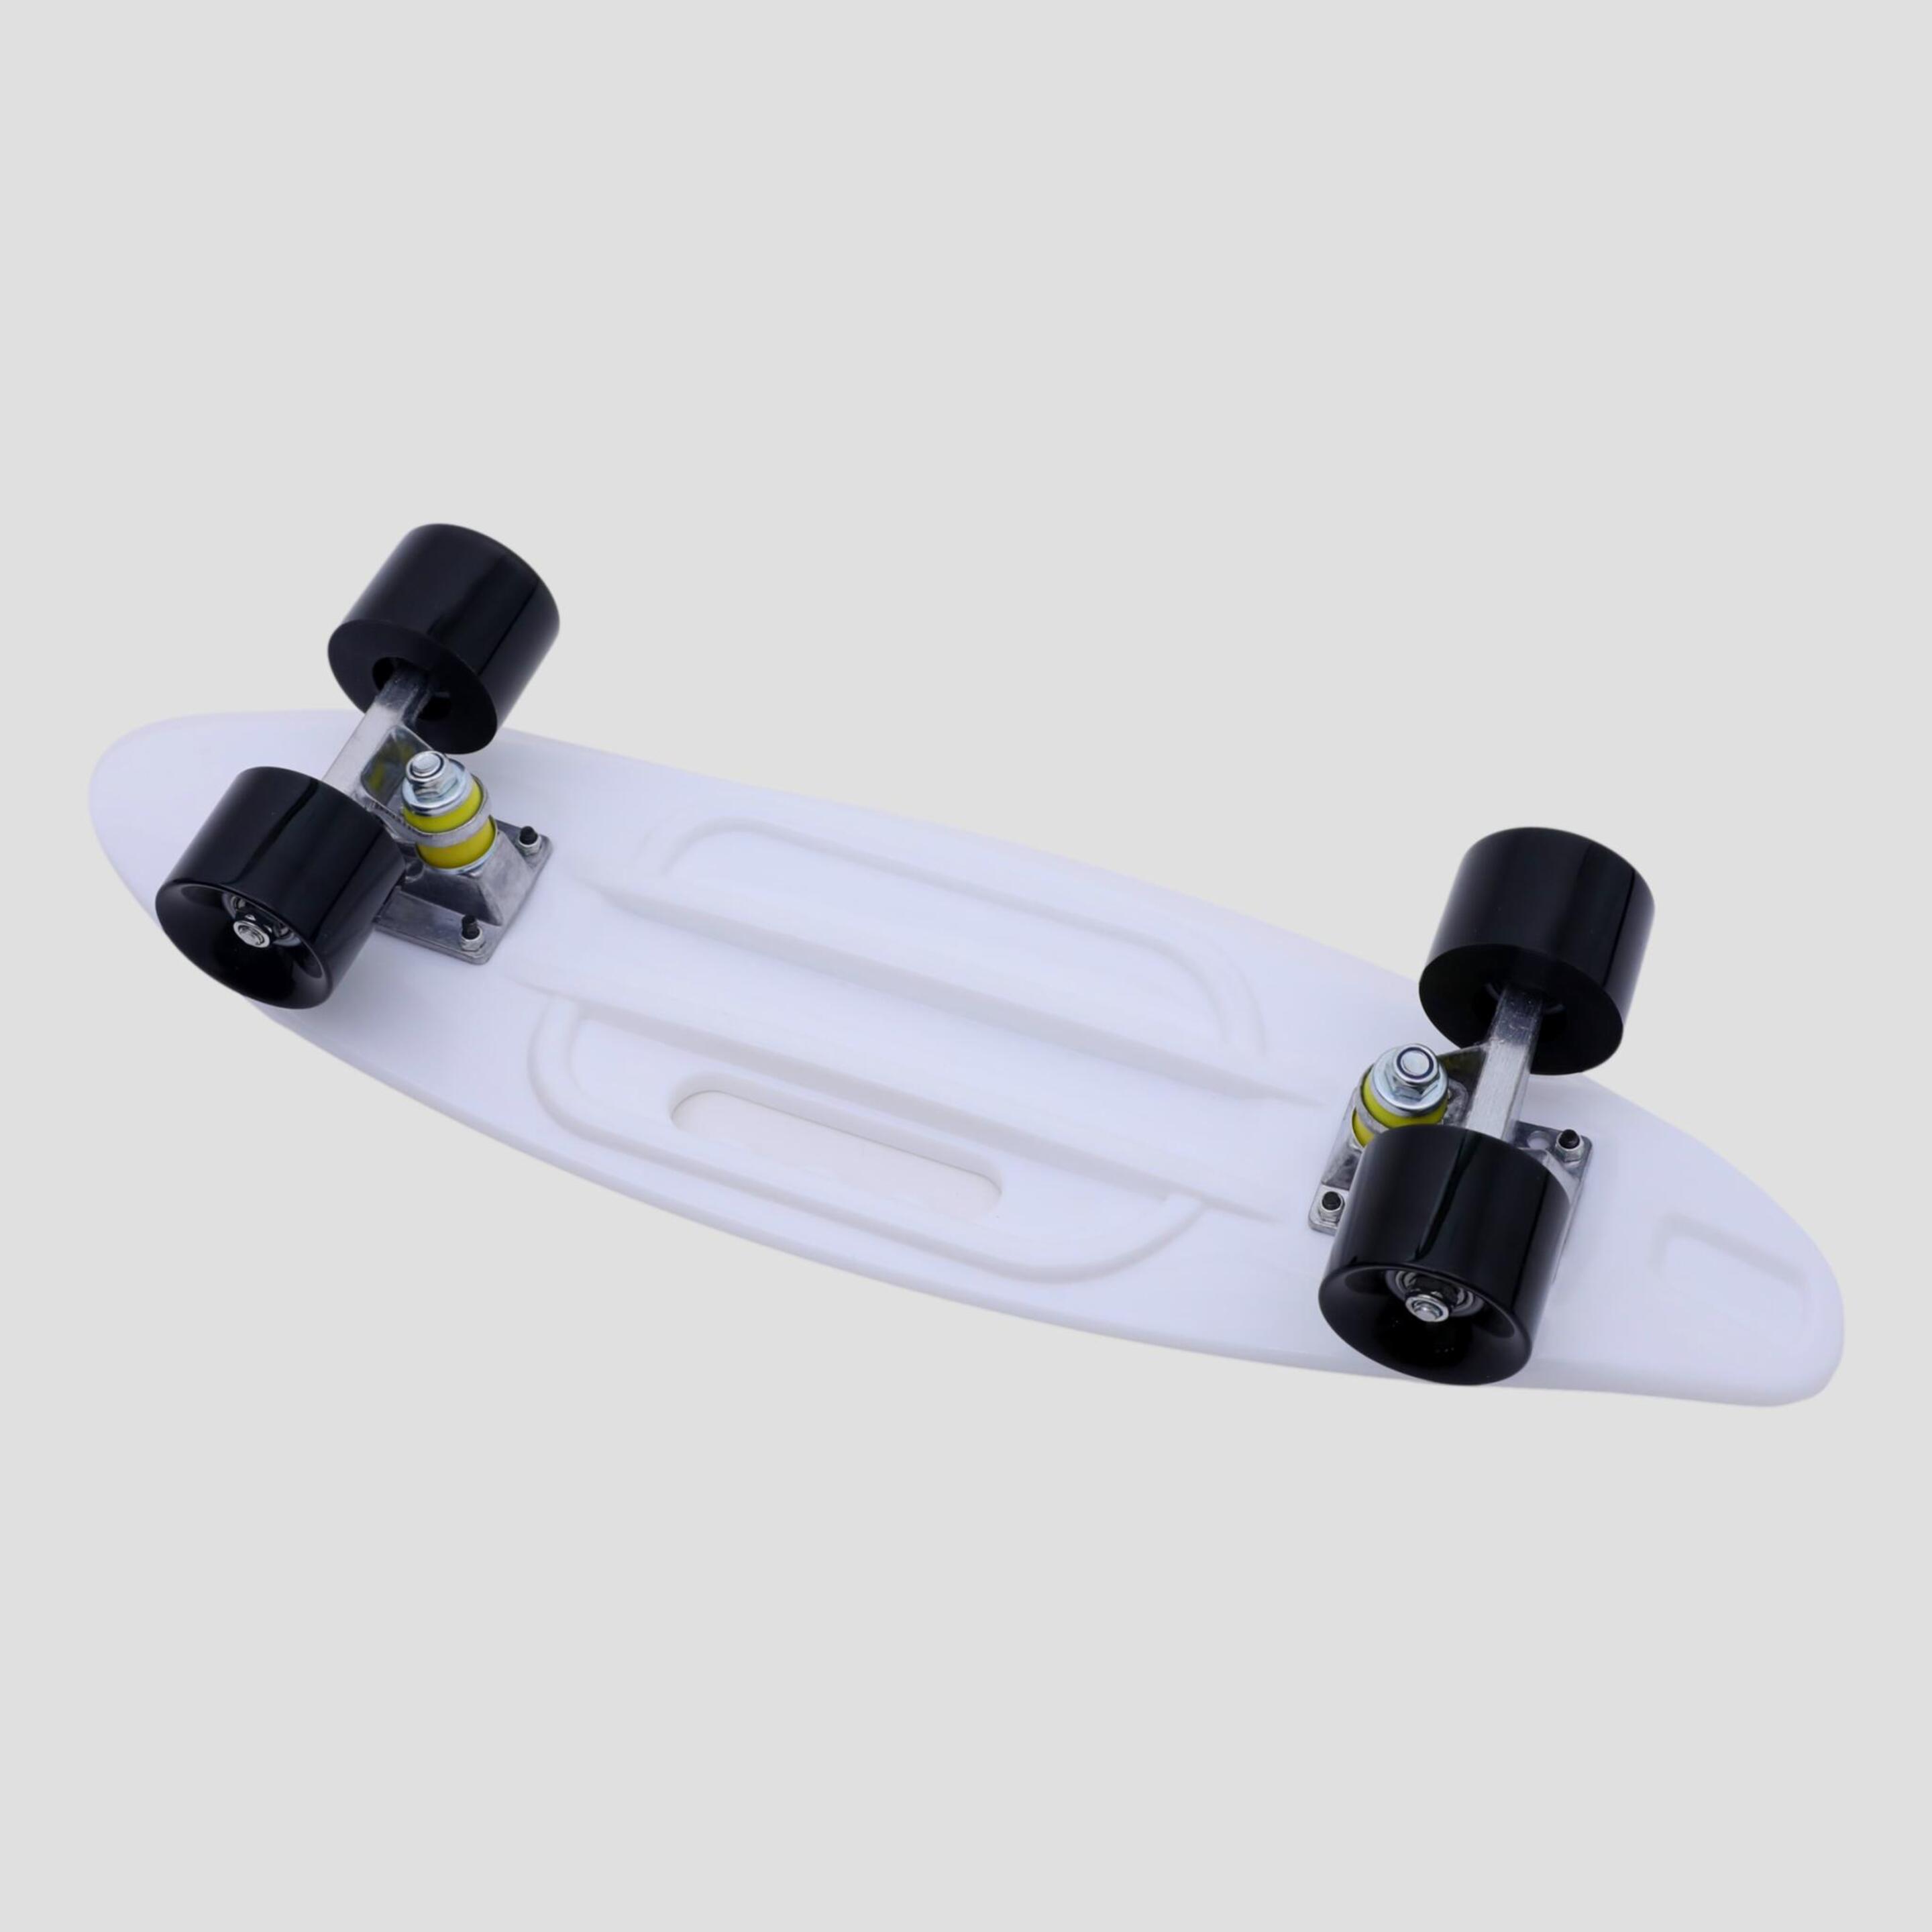 Cruiser Skate Thelongboarder Penny Picasso 23"